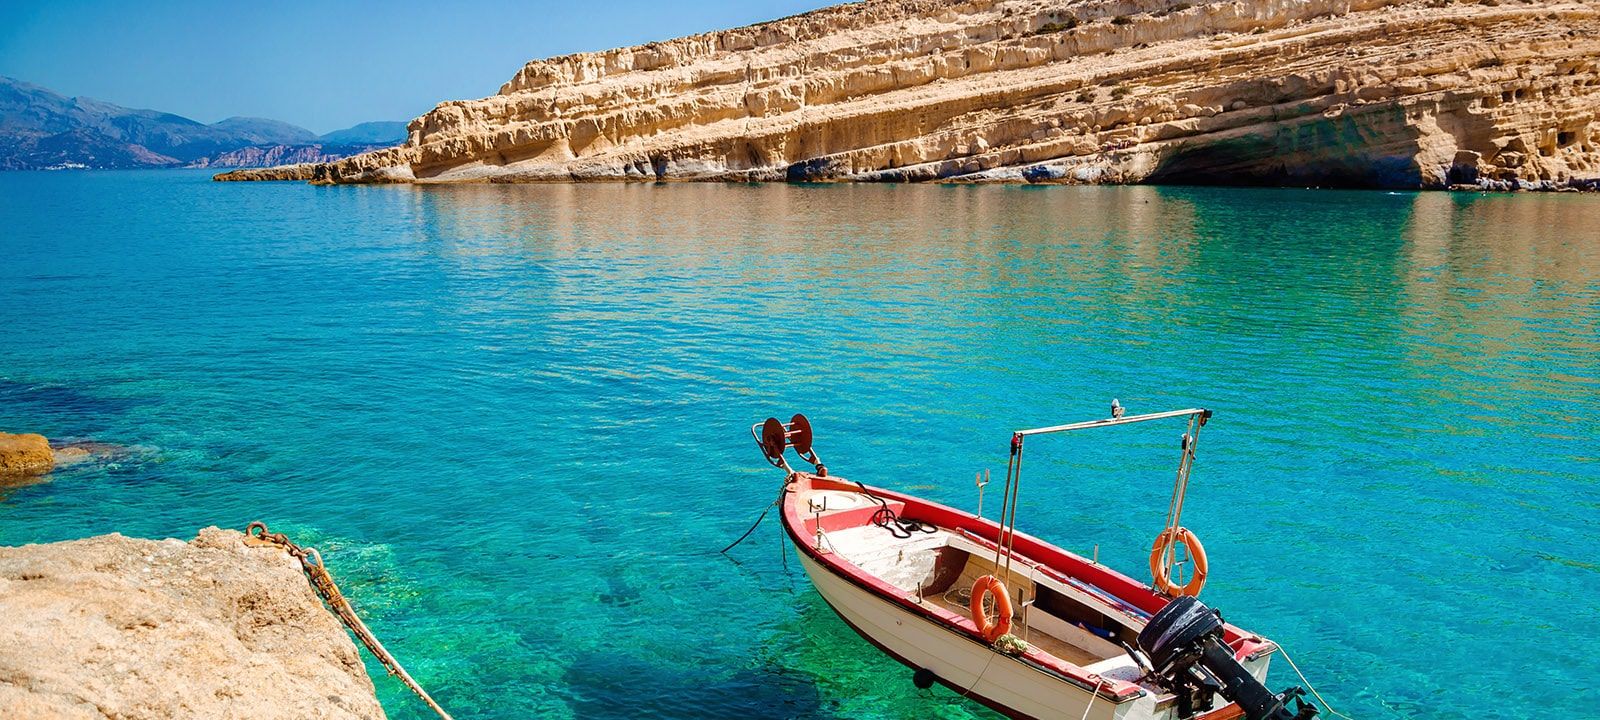 The destination of Crete for a trip with Greek Adventures